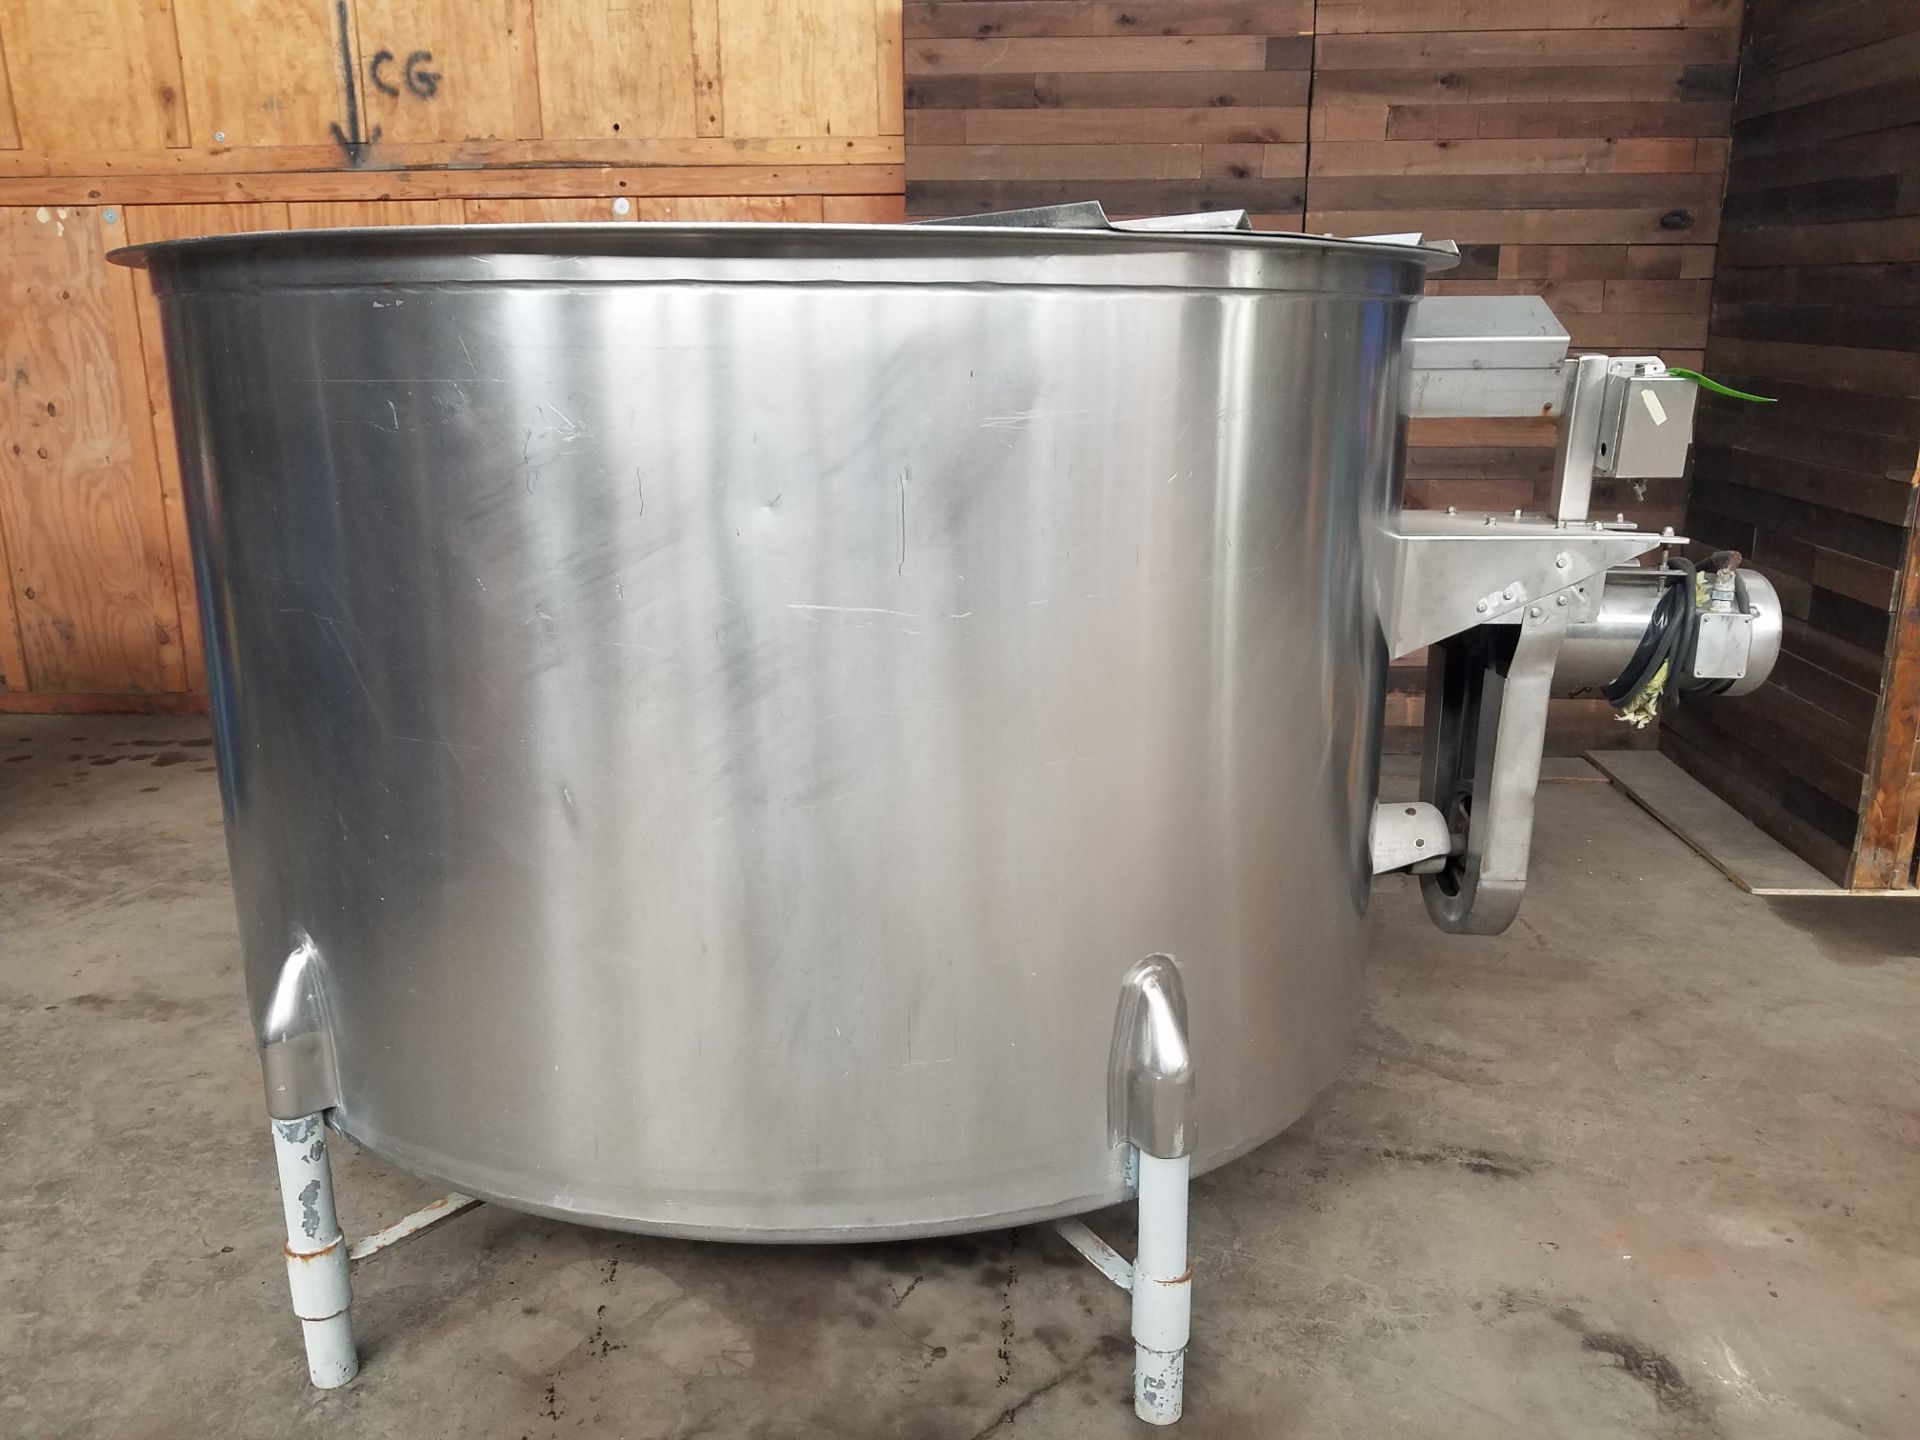 Stainless Steel Mixing Tank, 72" wide x 48" high, 3 HP, Volt 230-460 (Loading, Rigging & Site